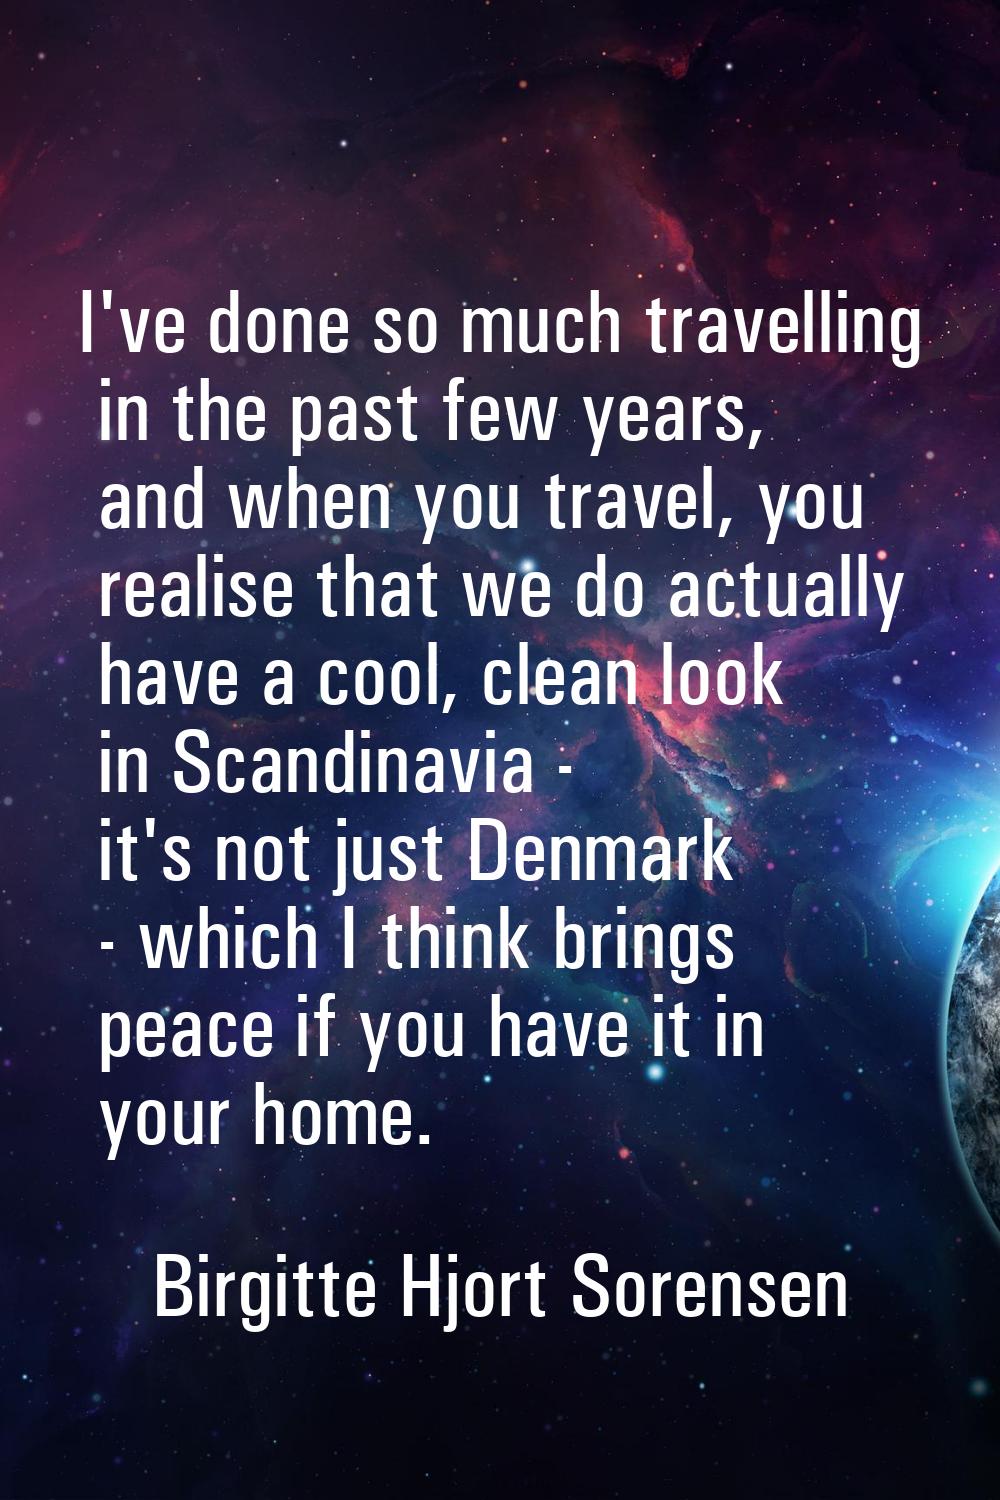 I've done so much travelling in the past few years, and when you travel, you realise that we do act